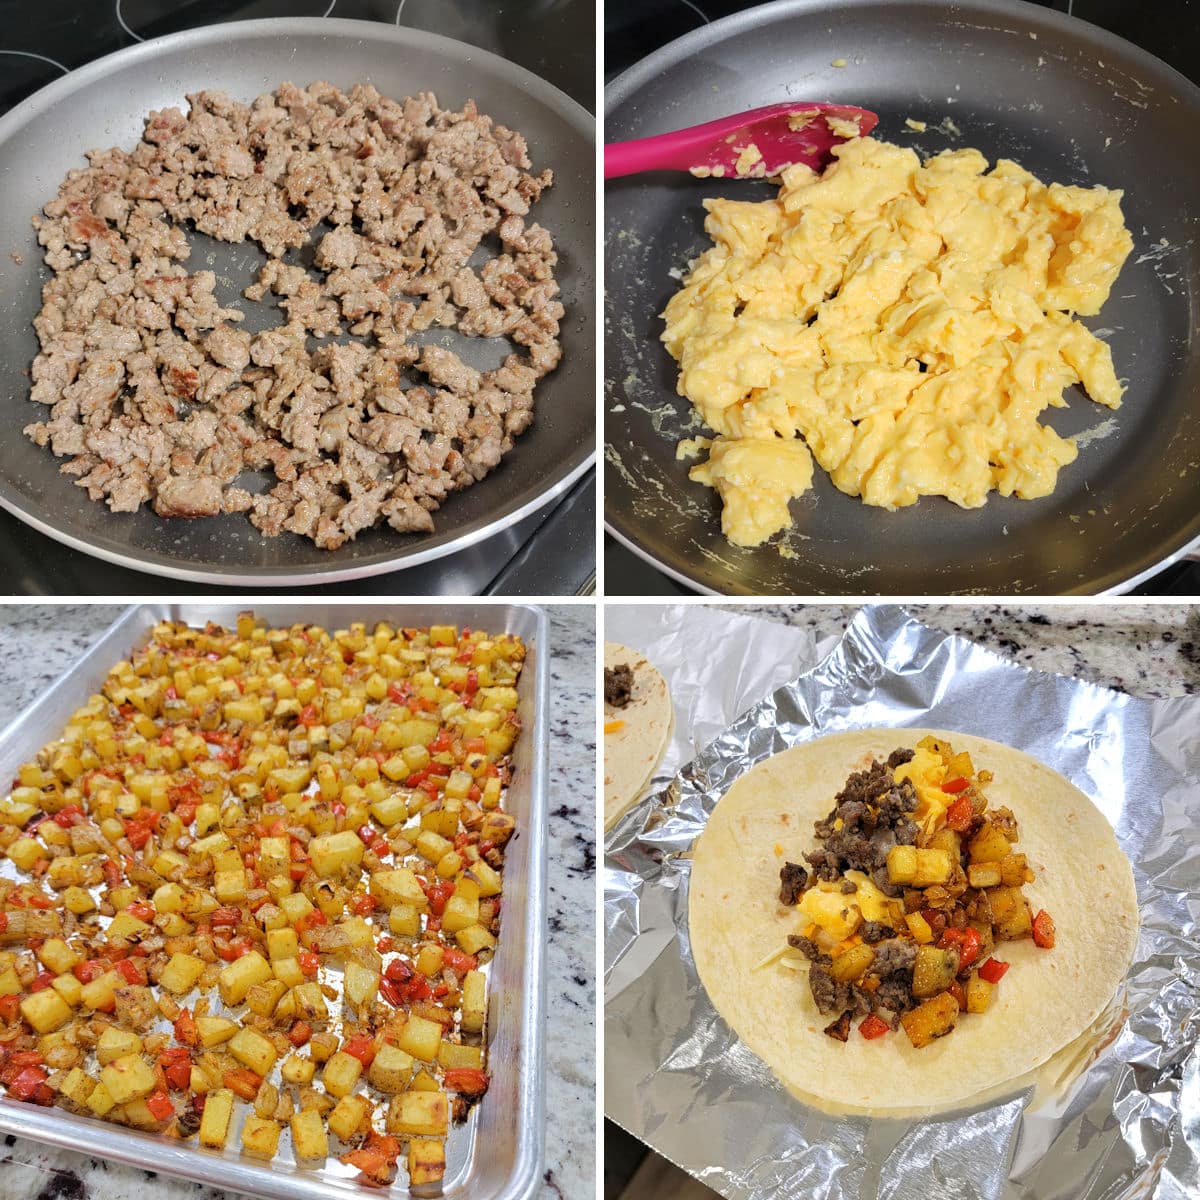 Making the components of a breakfast burrito.